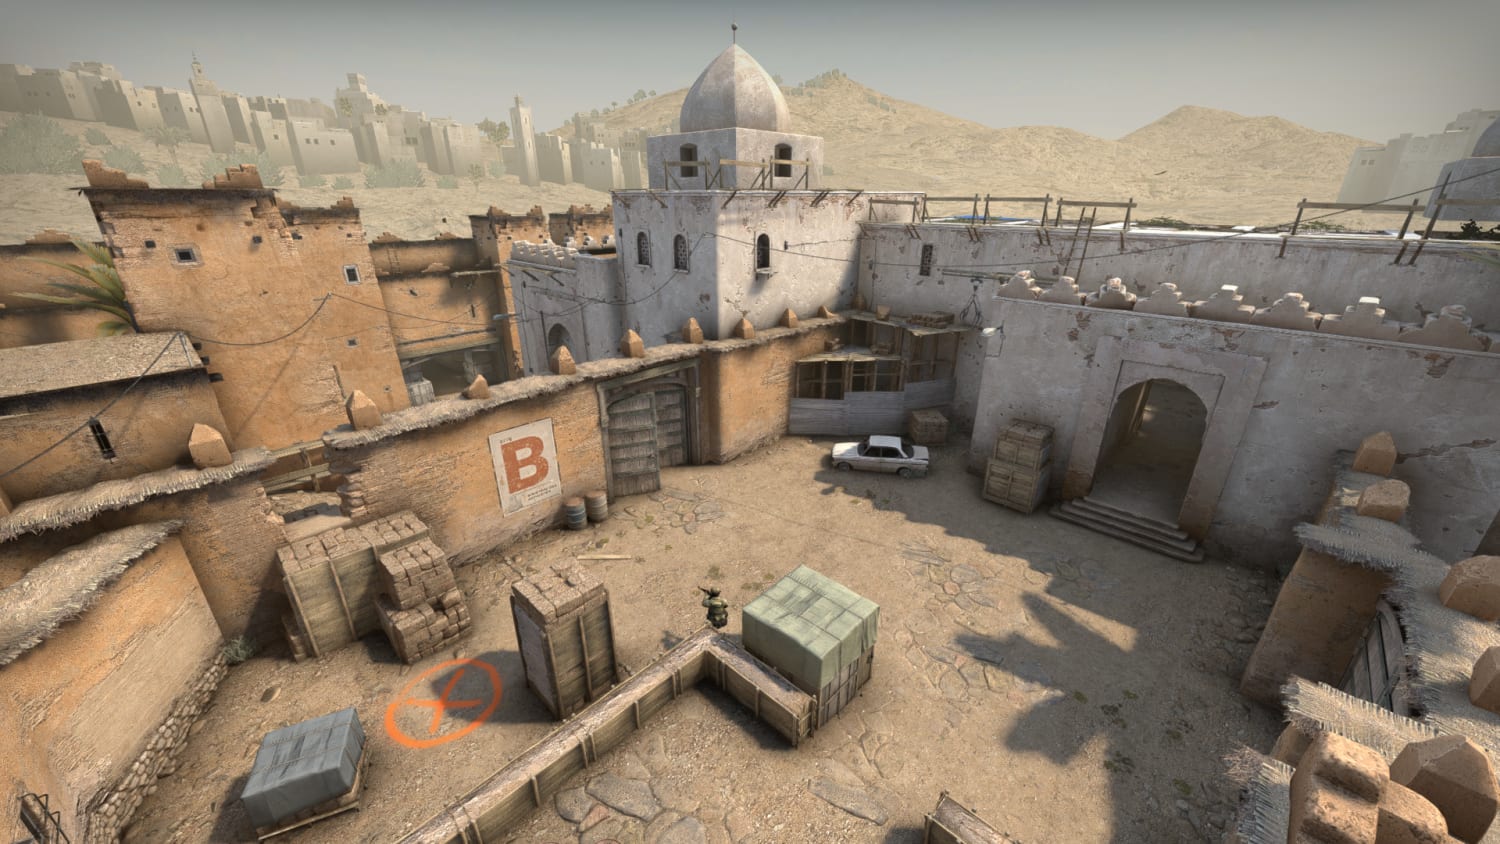 Counter Strike 2: Counter-Strike 2 gearing up for Summer 2023